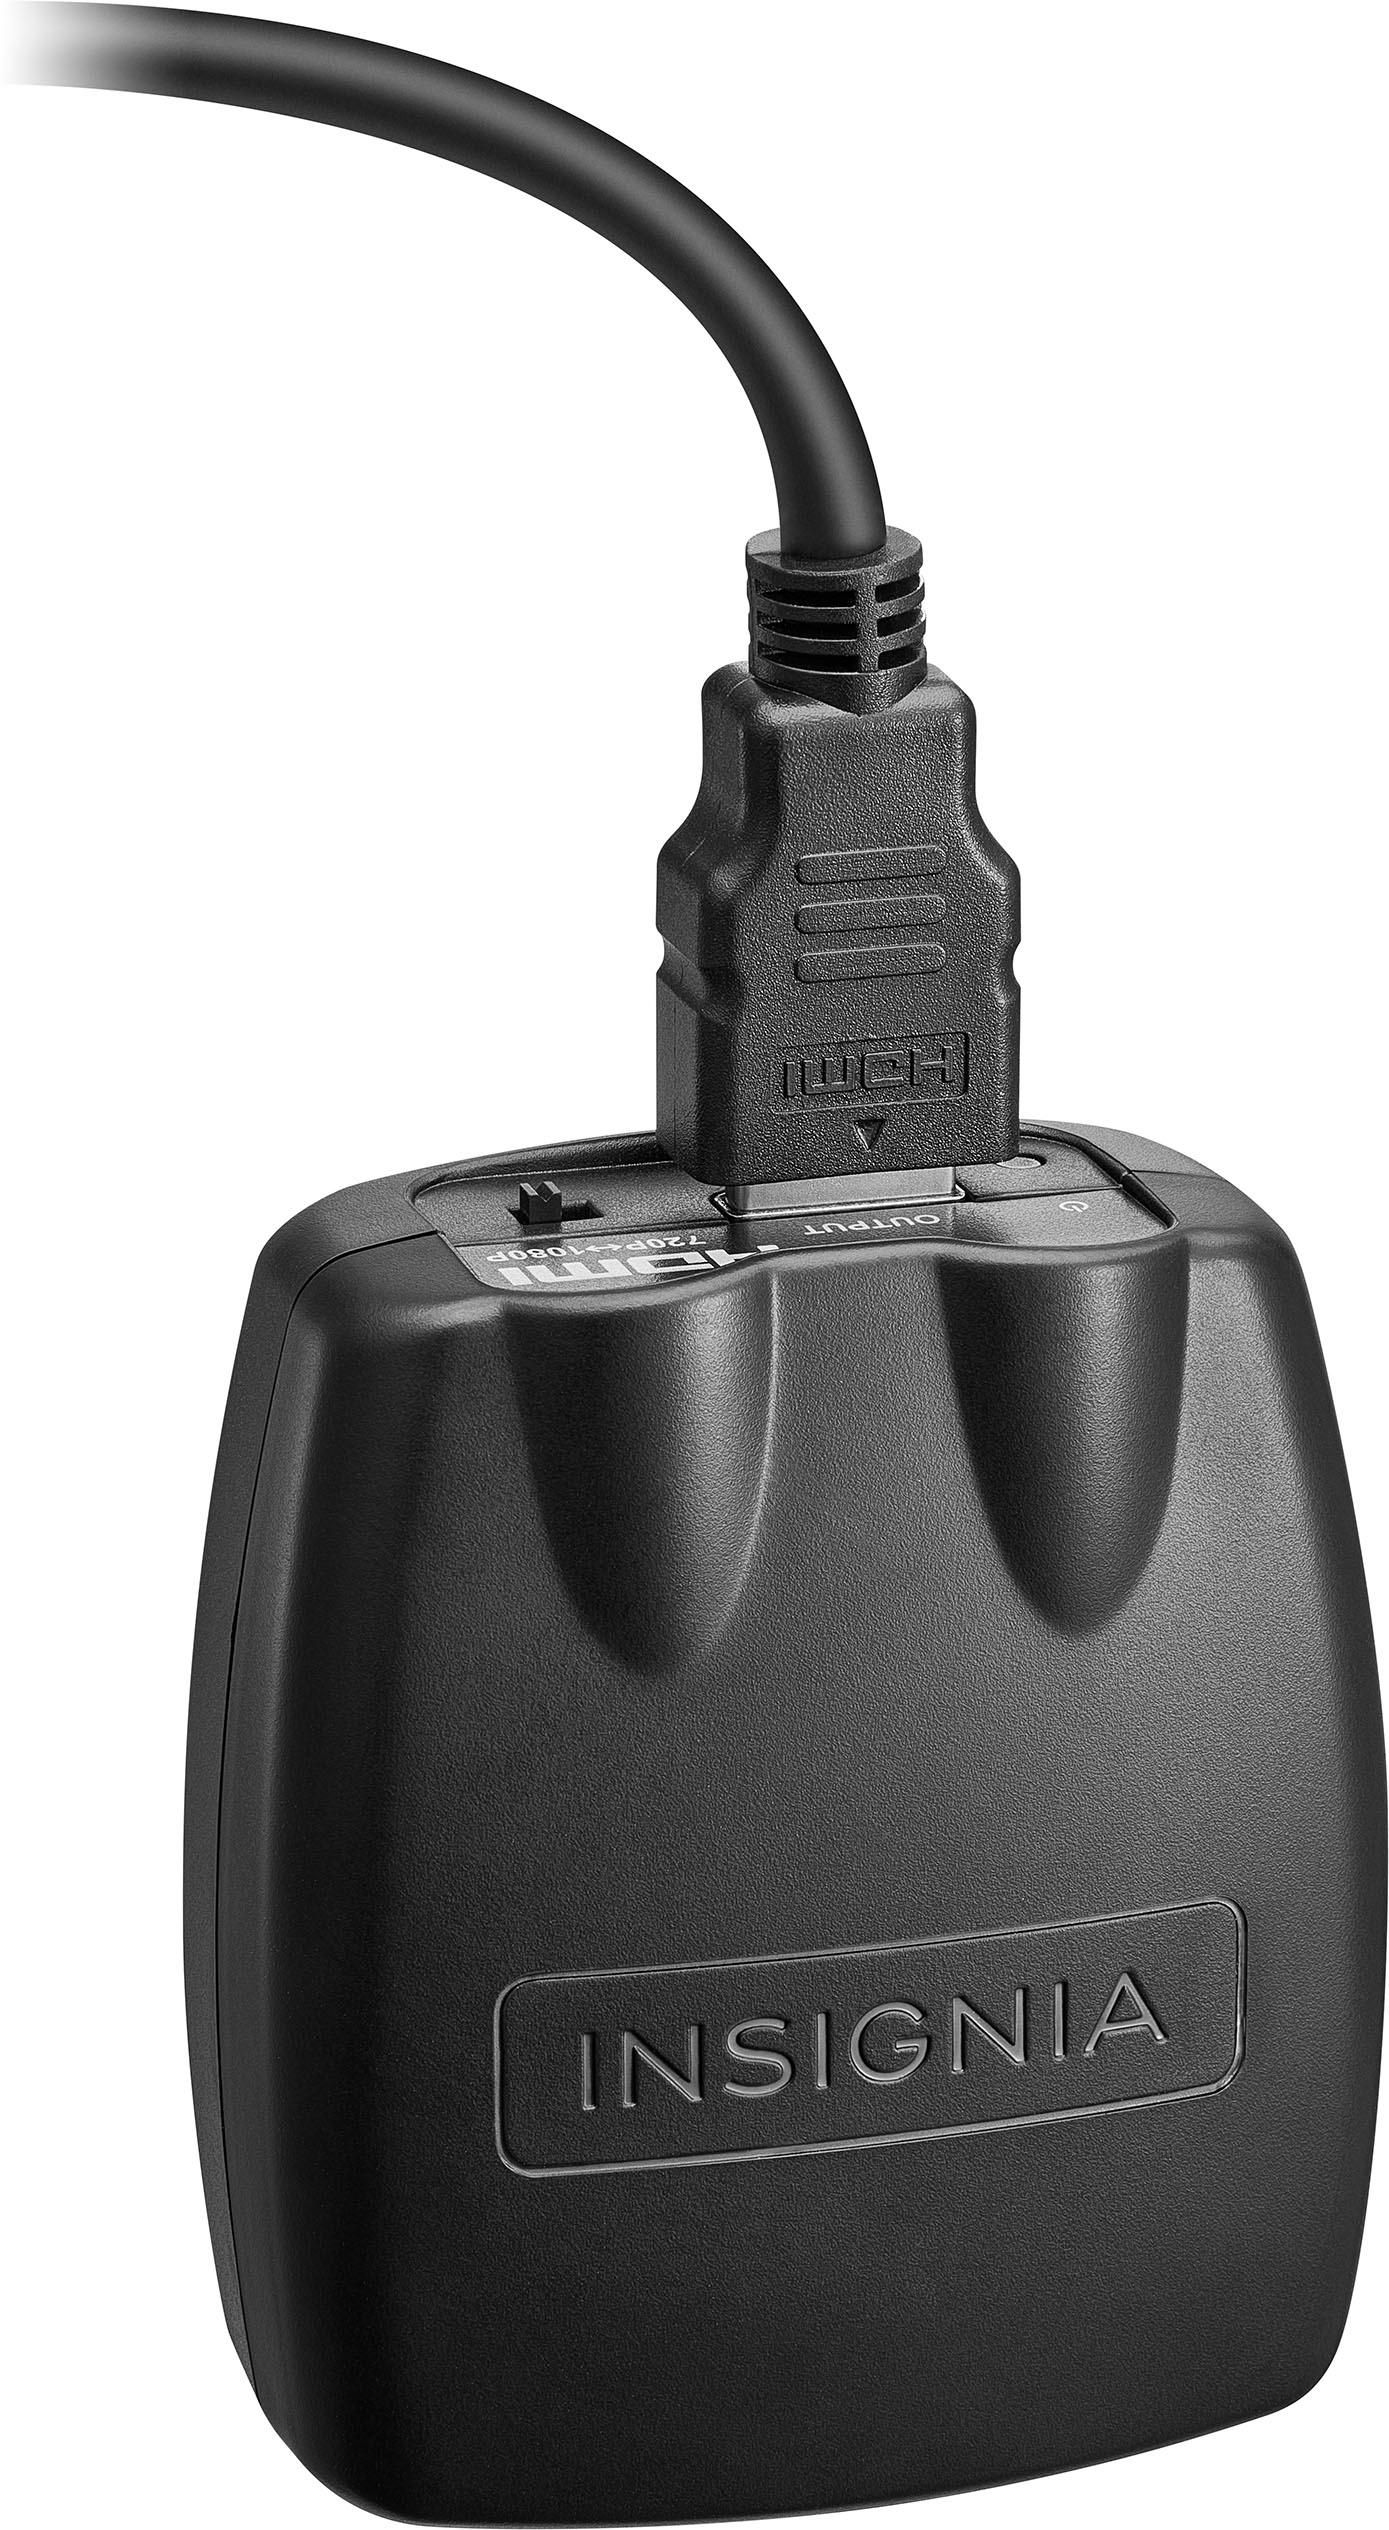 RCA Jack Adapter with Cable Stock Photo - Image of theater, color: 112285774